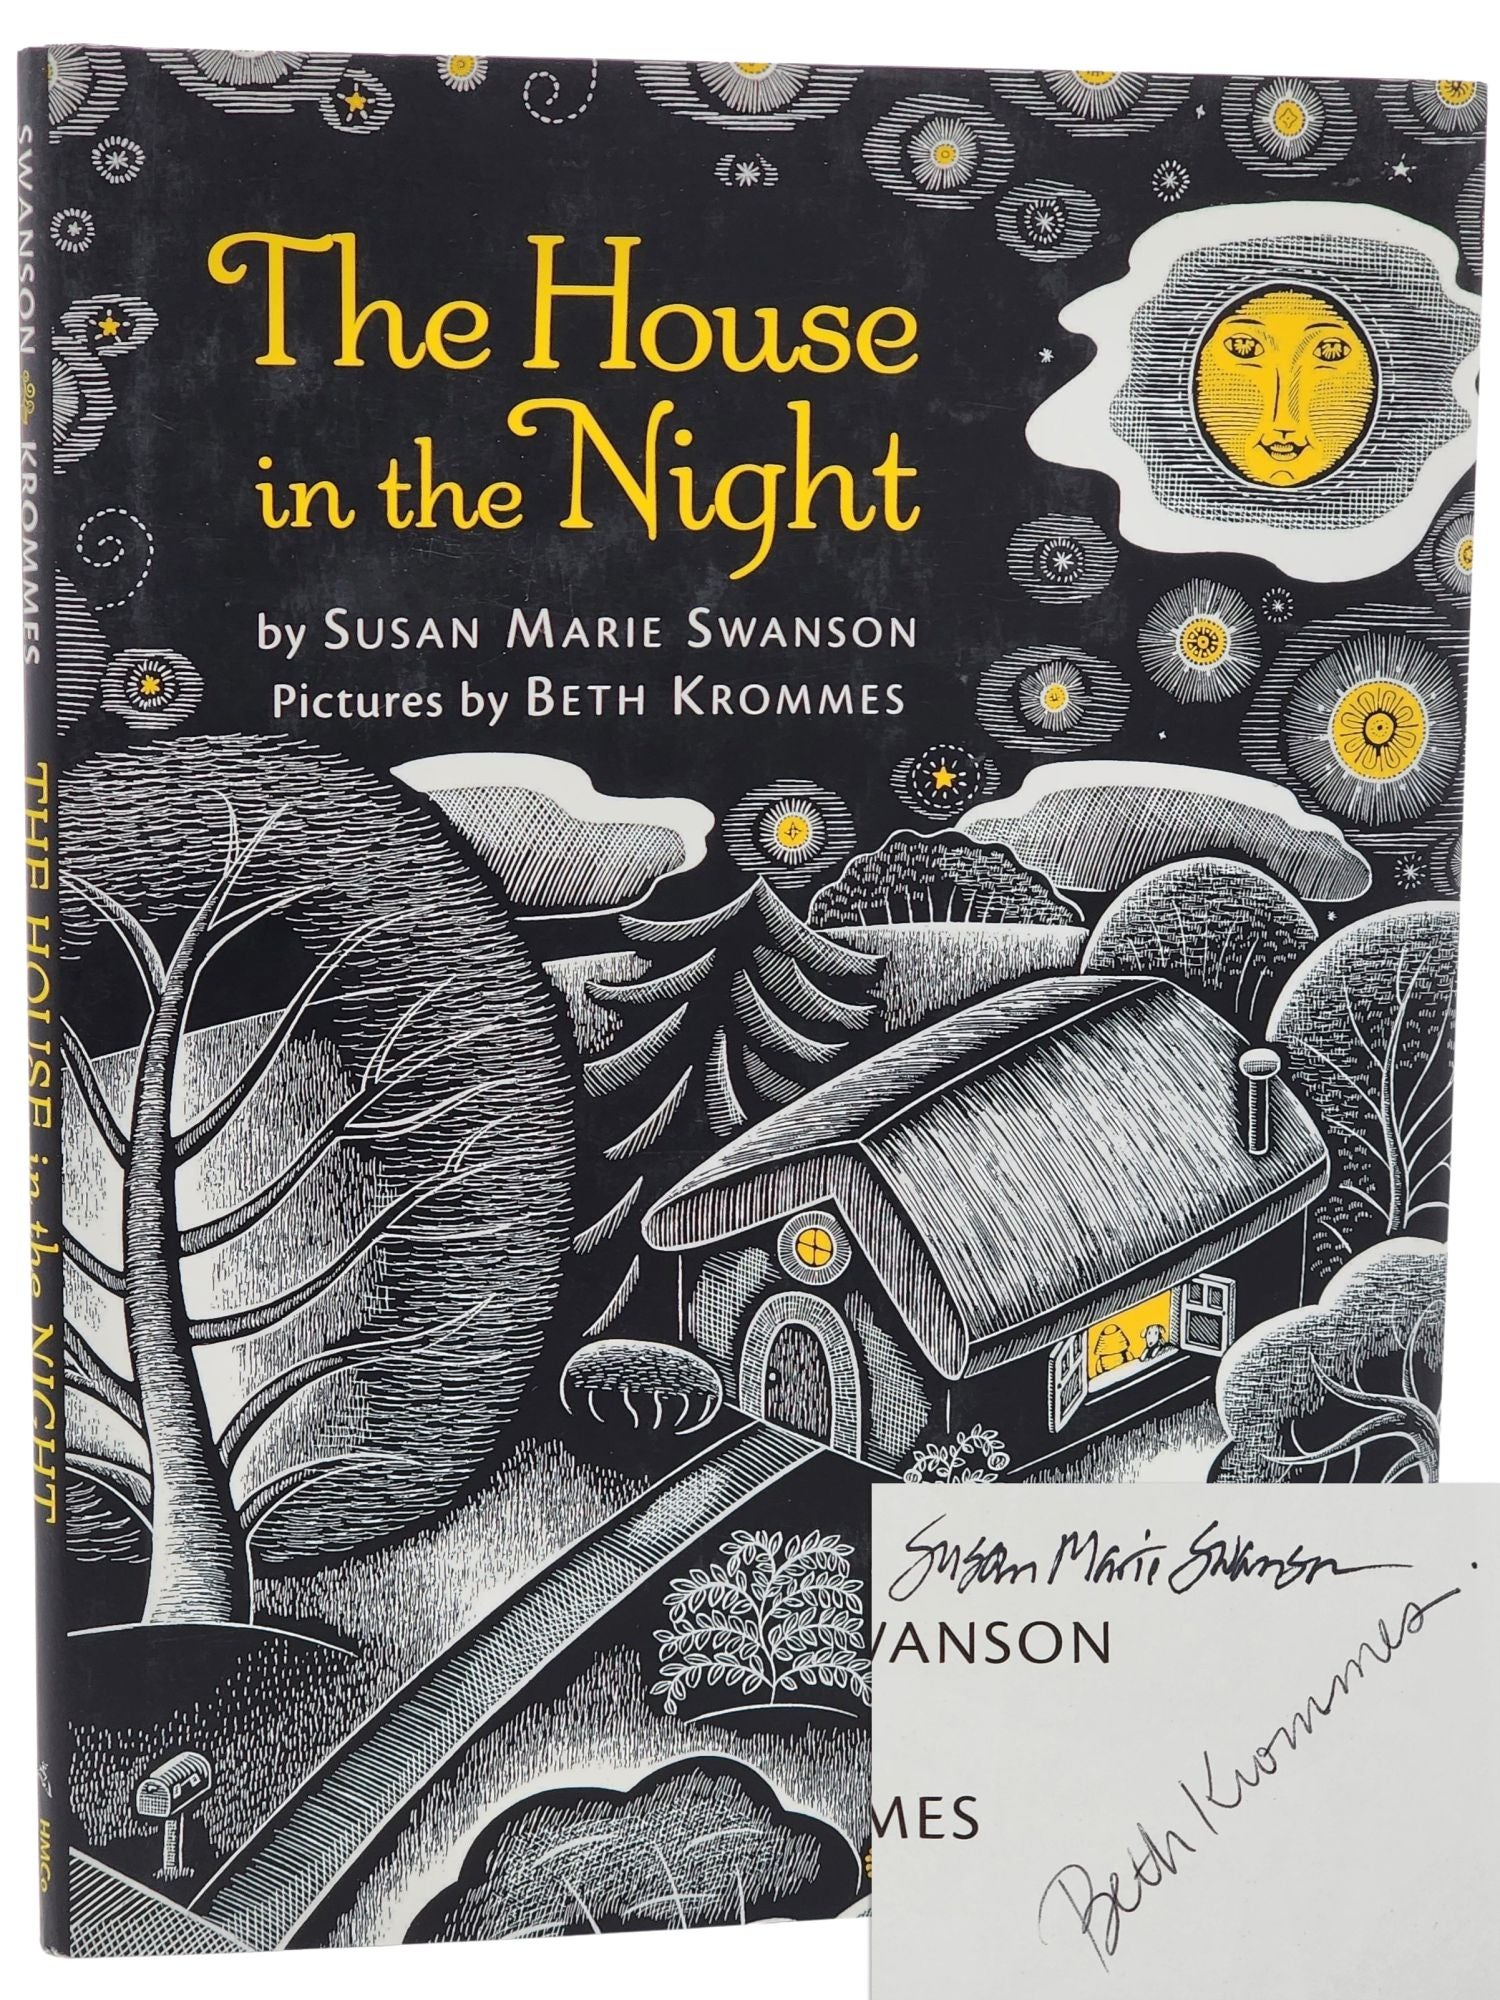 [Book #27196] THE HOUSE IN THE NIGHT. Susan Marie Swanson, Beth Krommes.